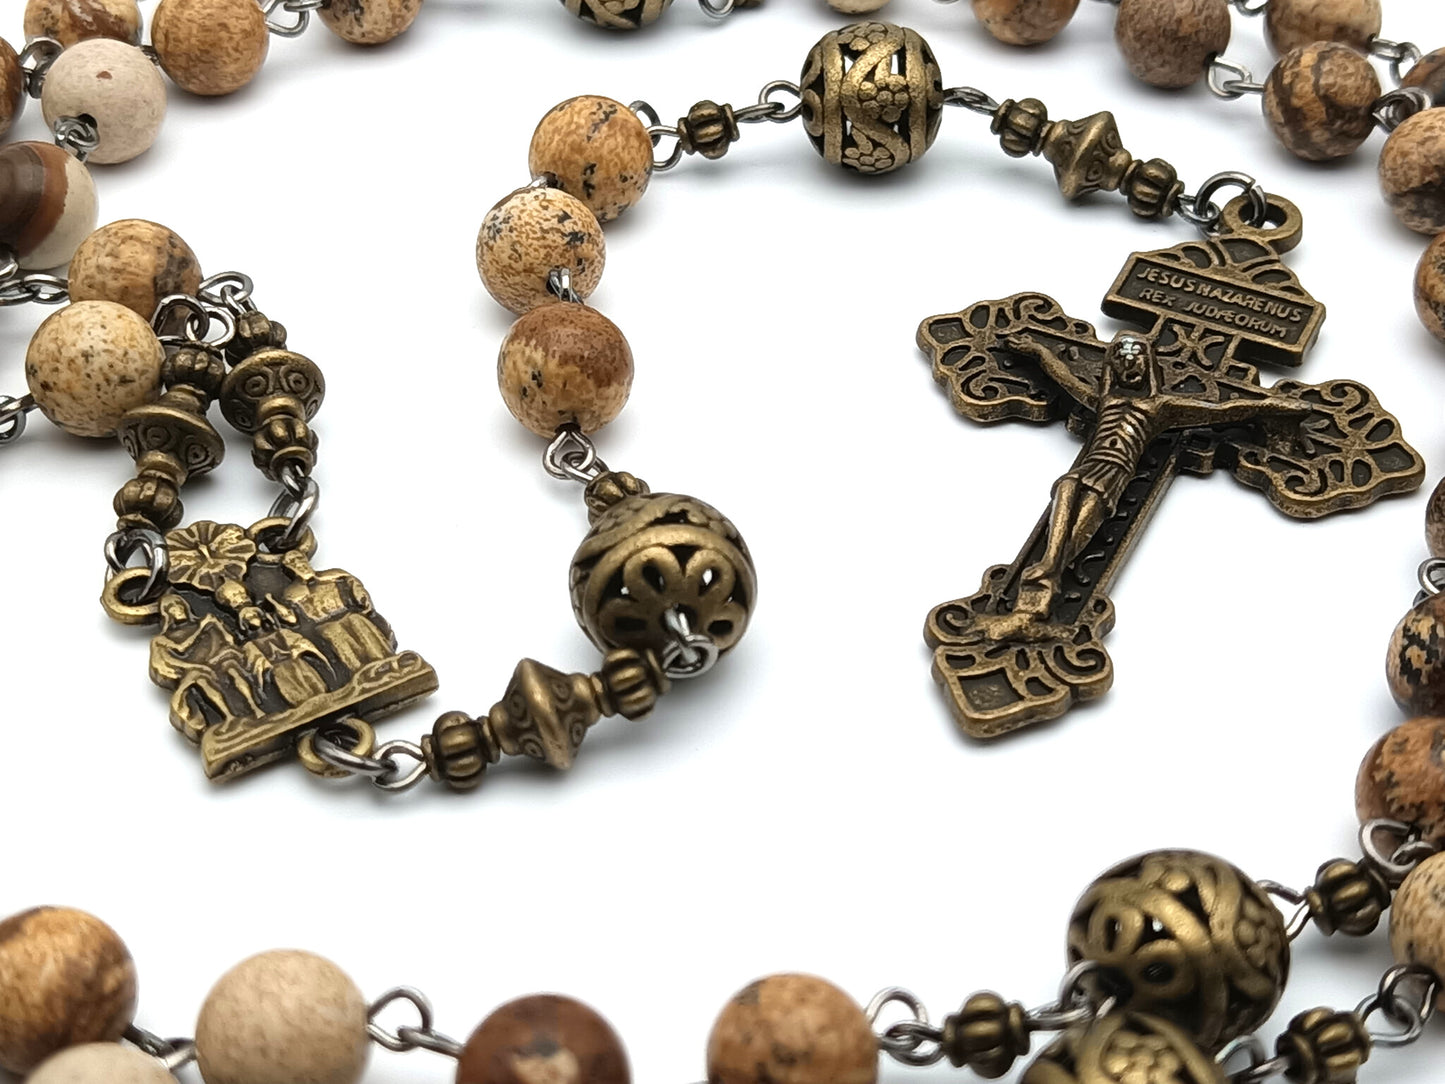 Vintage style unique rosary beads with natural jasper gemstone beads, bronze pardon crucifix, pater beads and Holy Trinity centre medal.